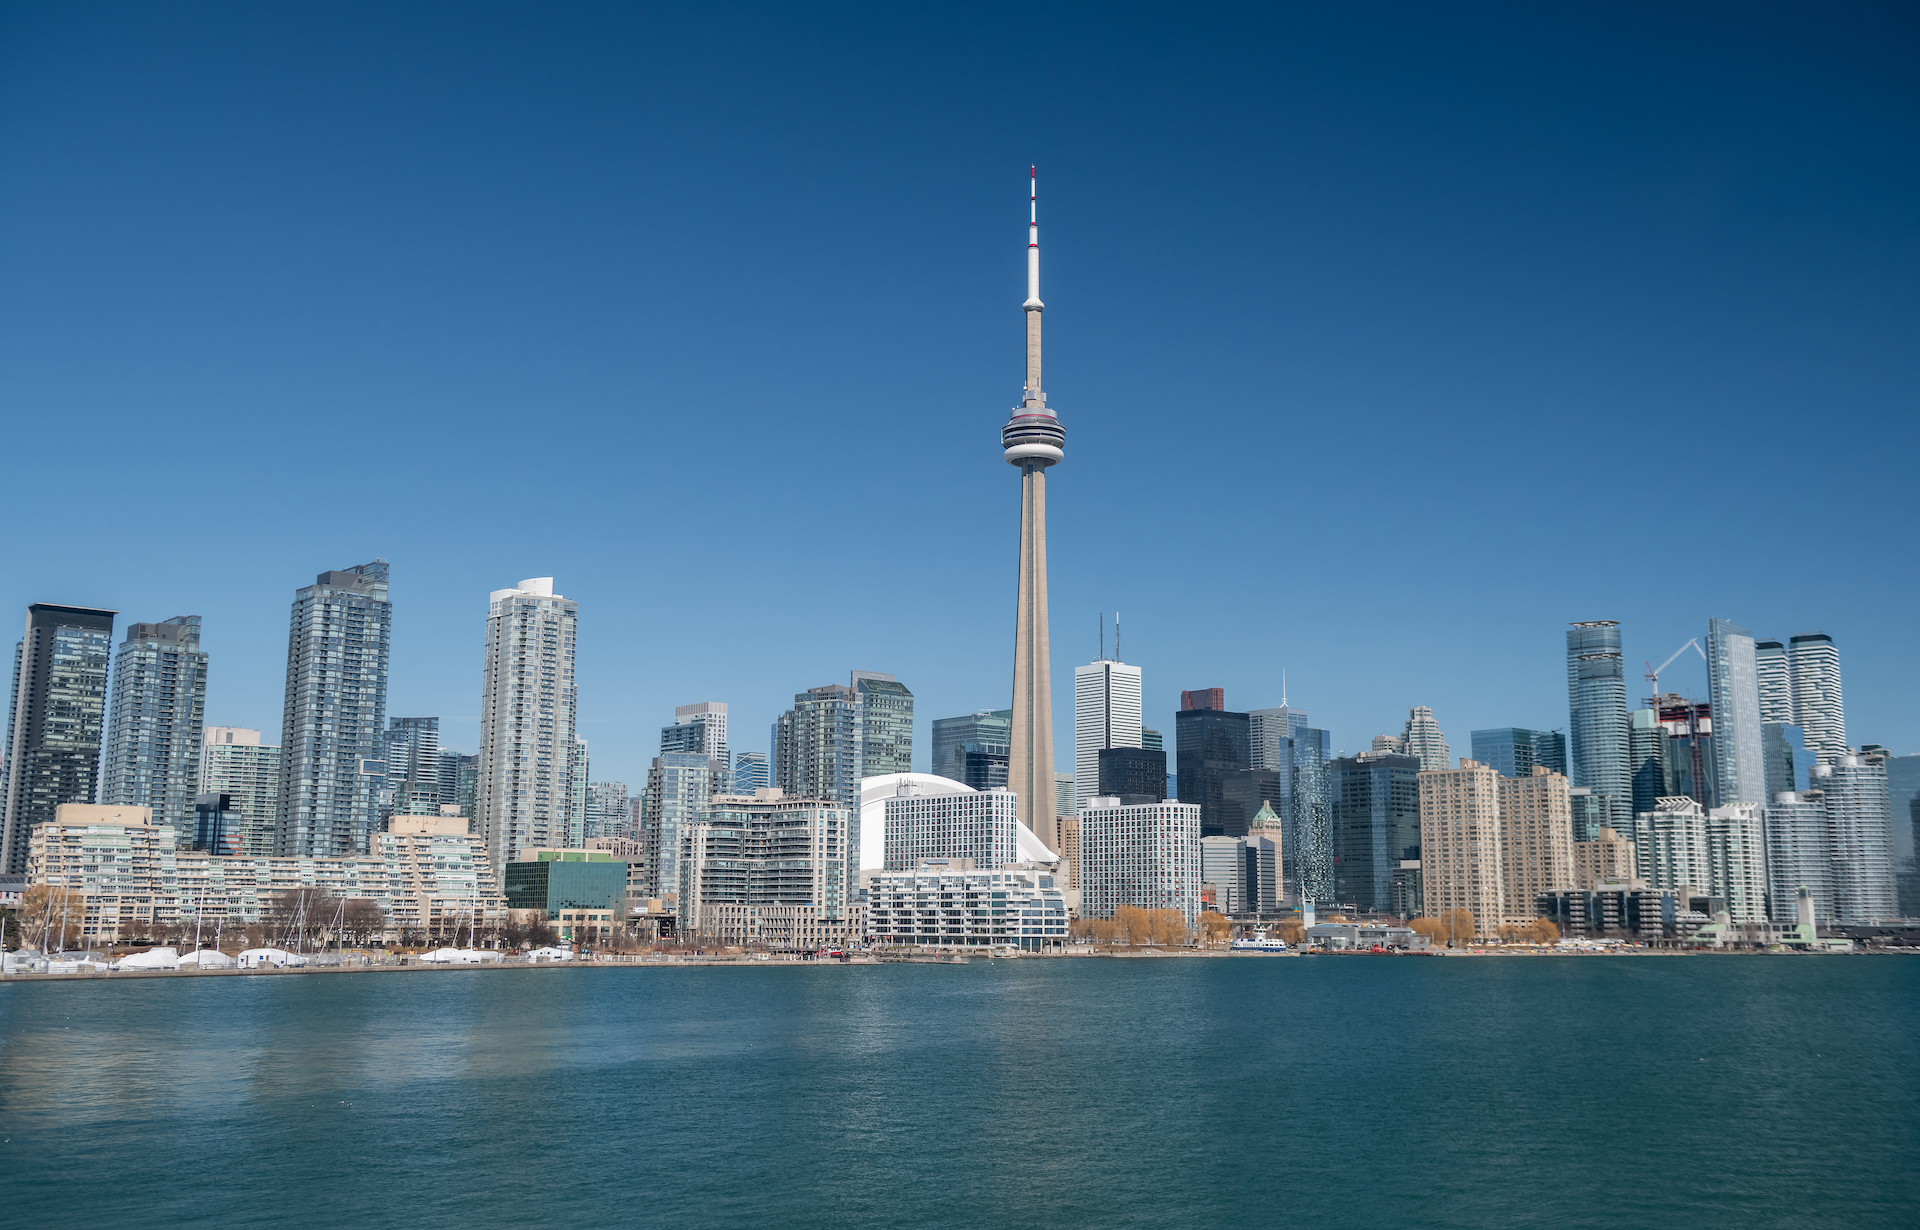 What You Should Know When Buying a Home in Toronto